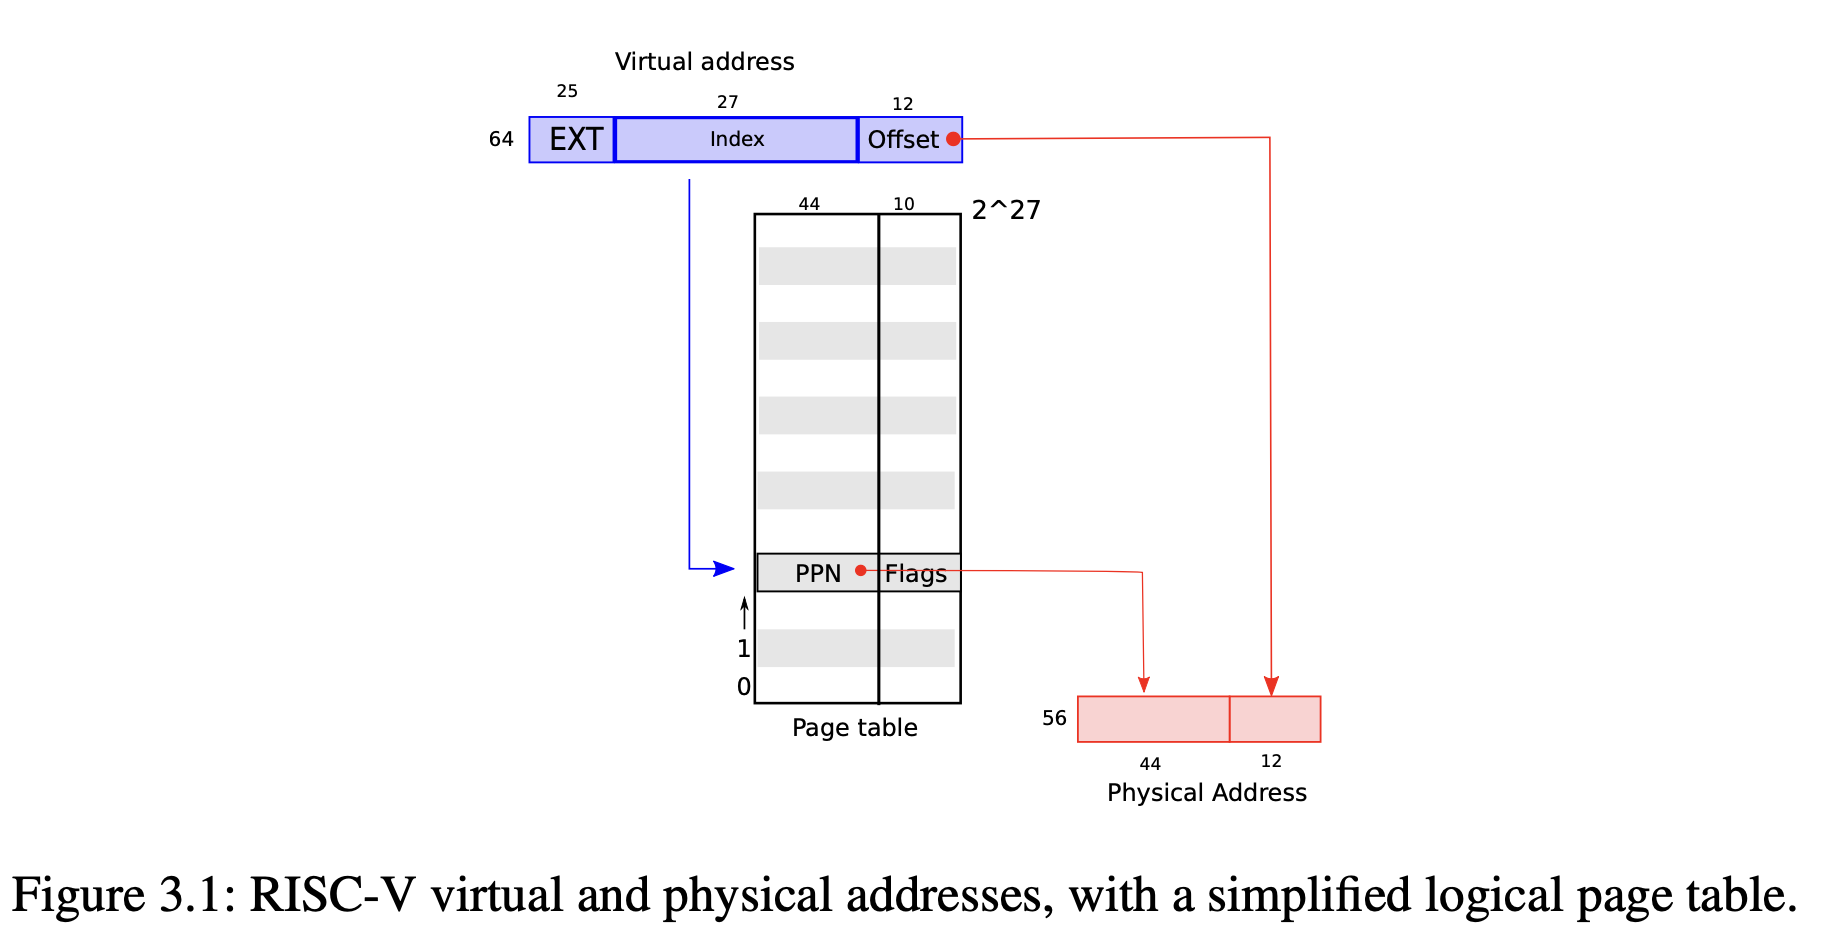 Figure 3.1: RISC-V virtual and physical addresses, with a simplified logical page table.